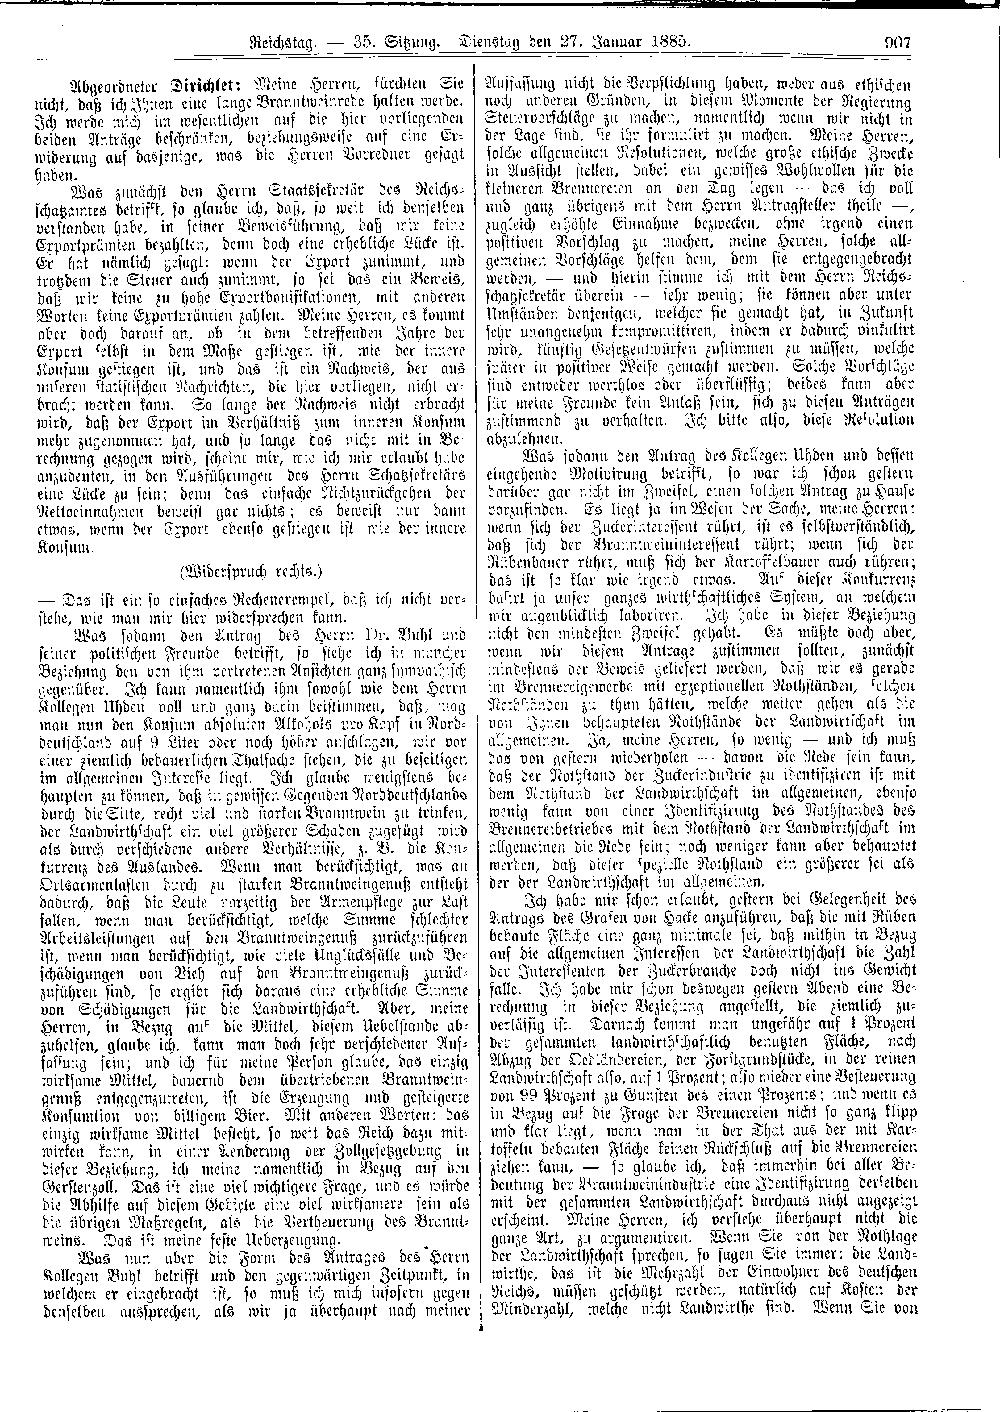 Scan of page 907